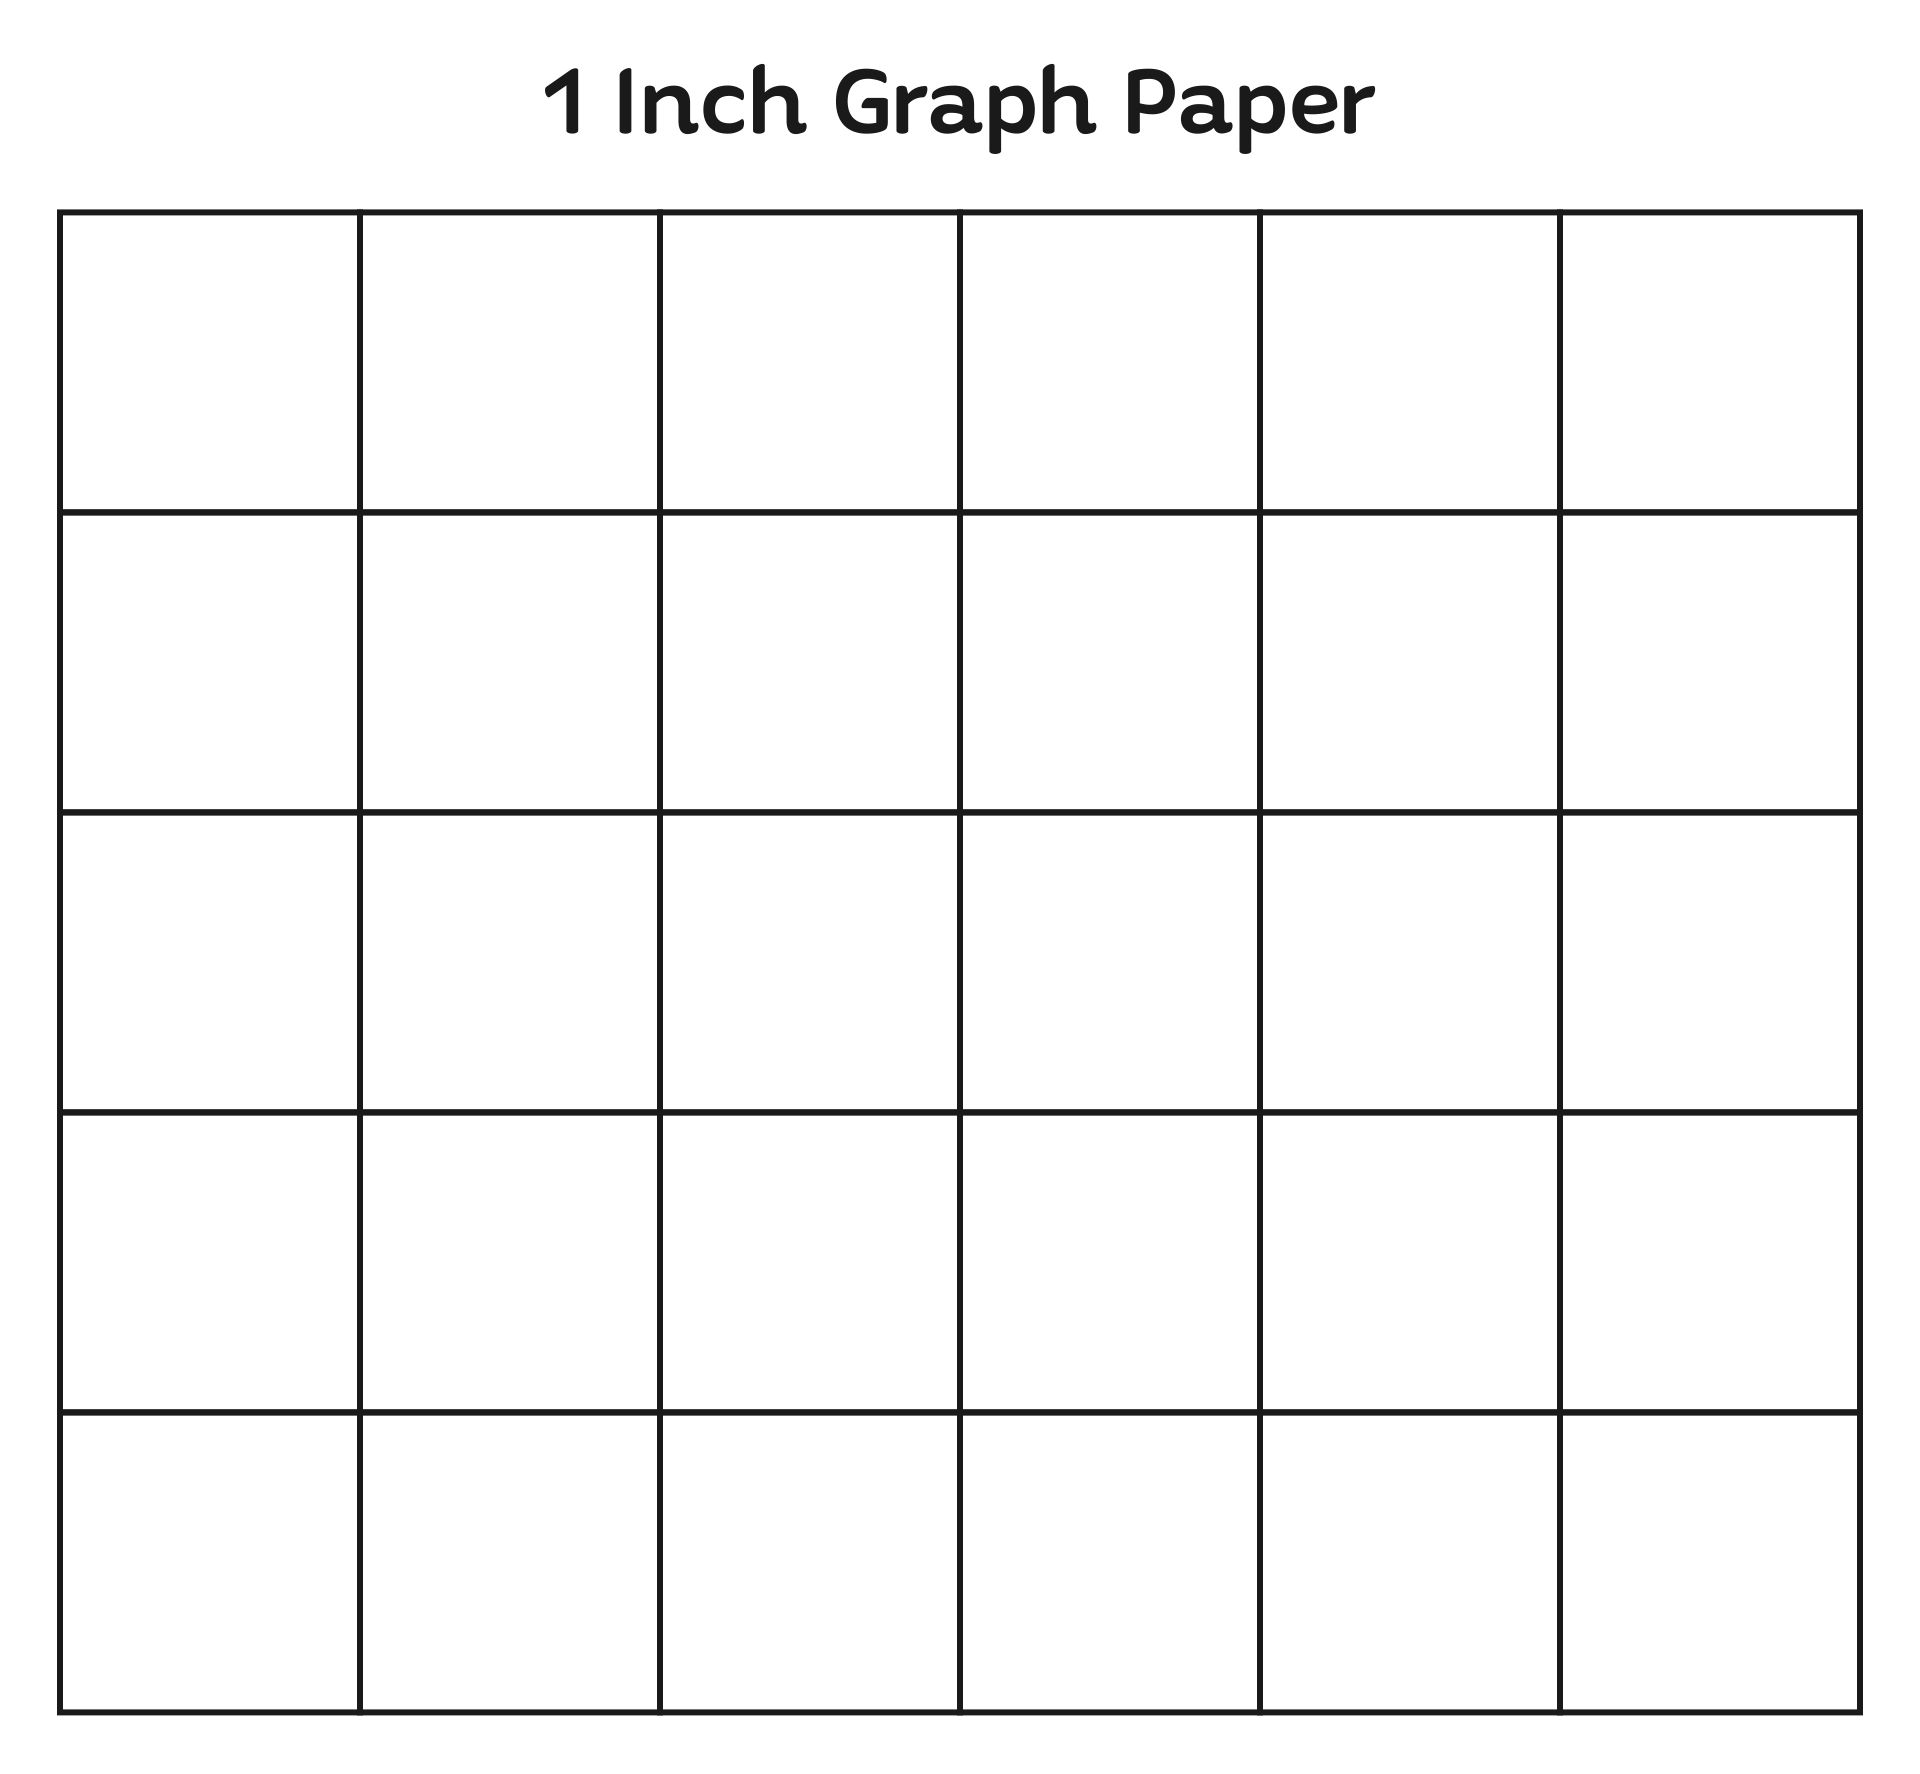 1 Inch Graph Paper Print Outs